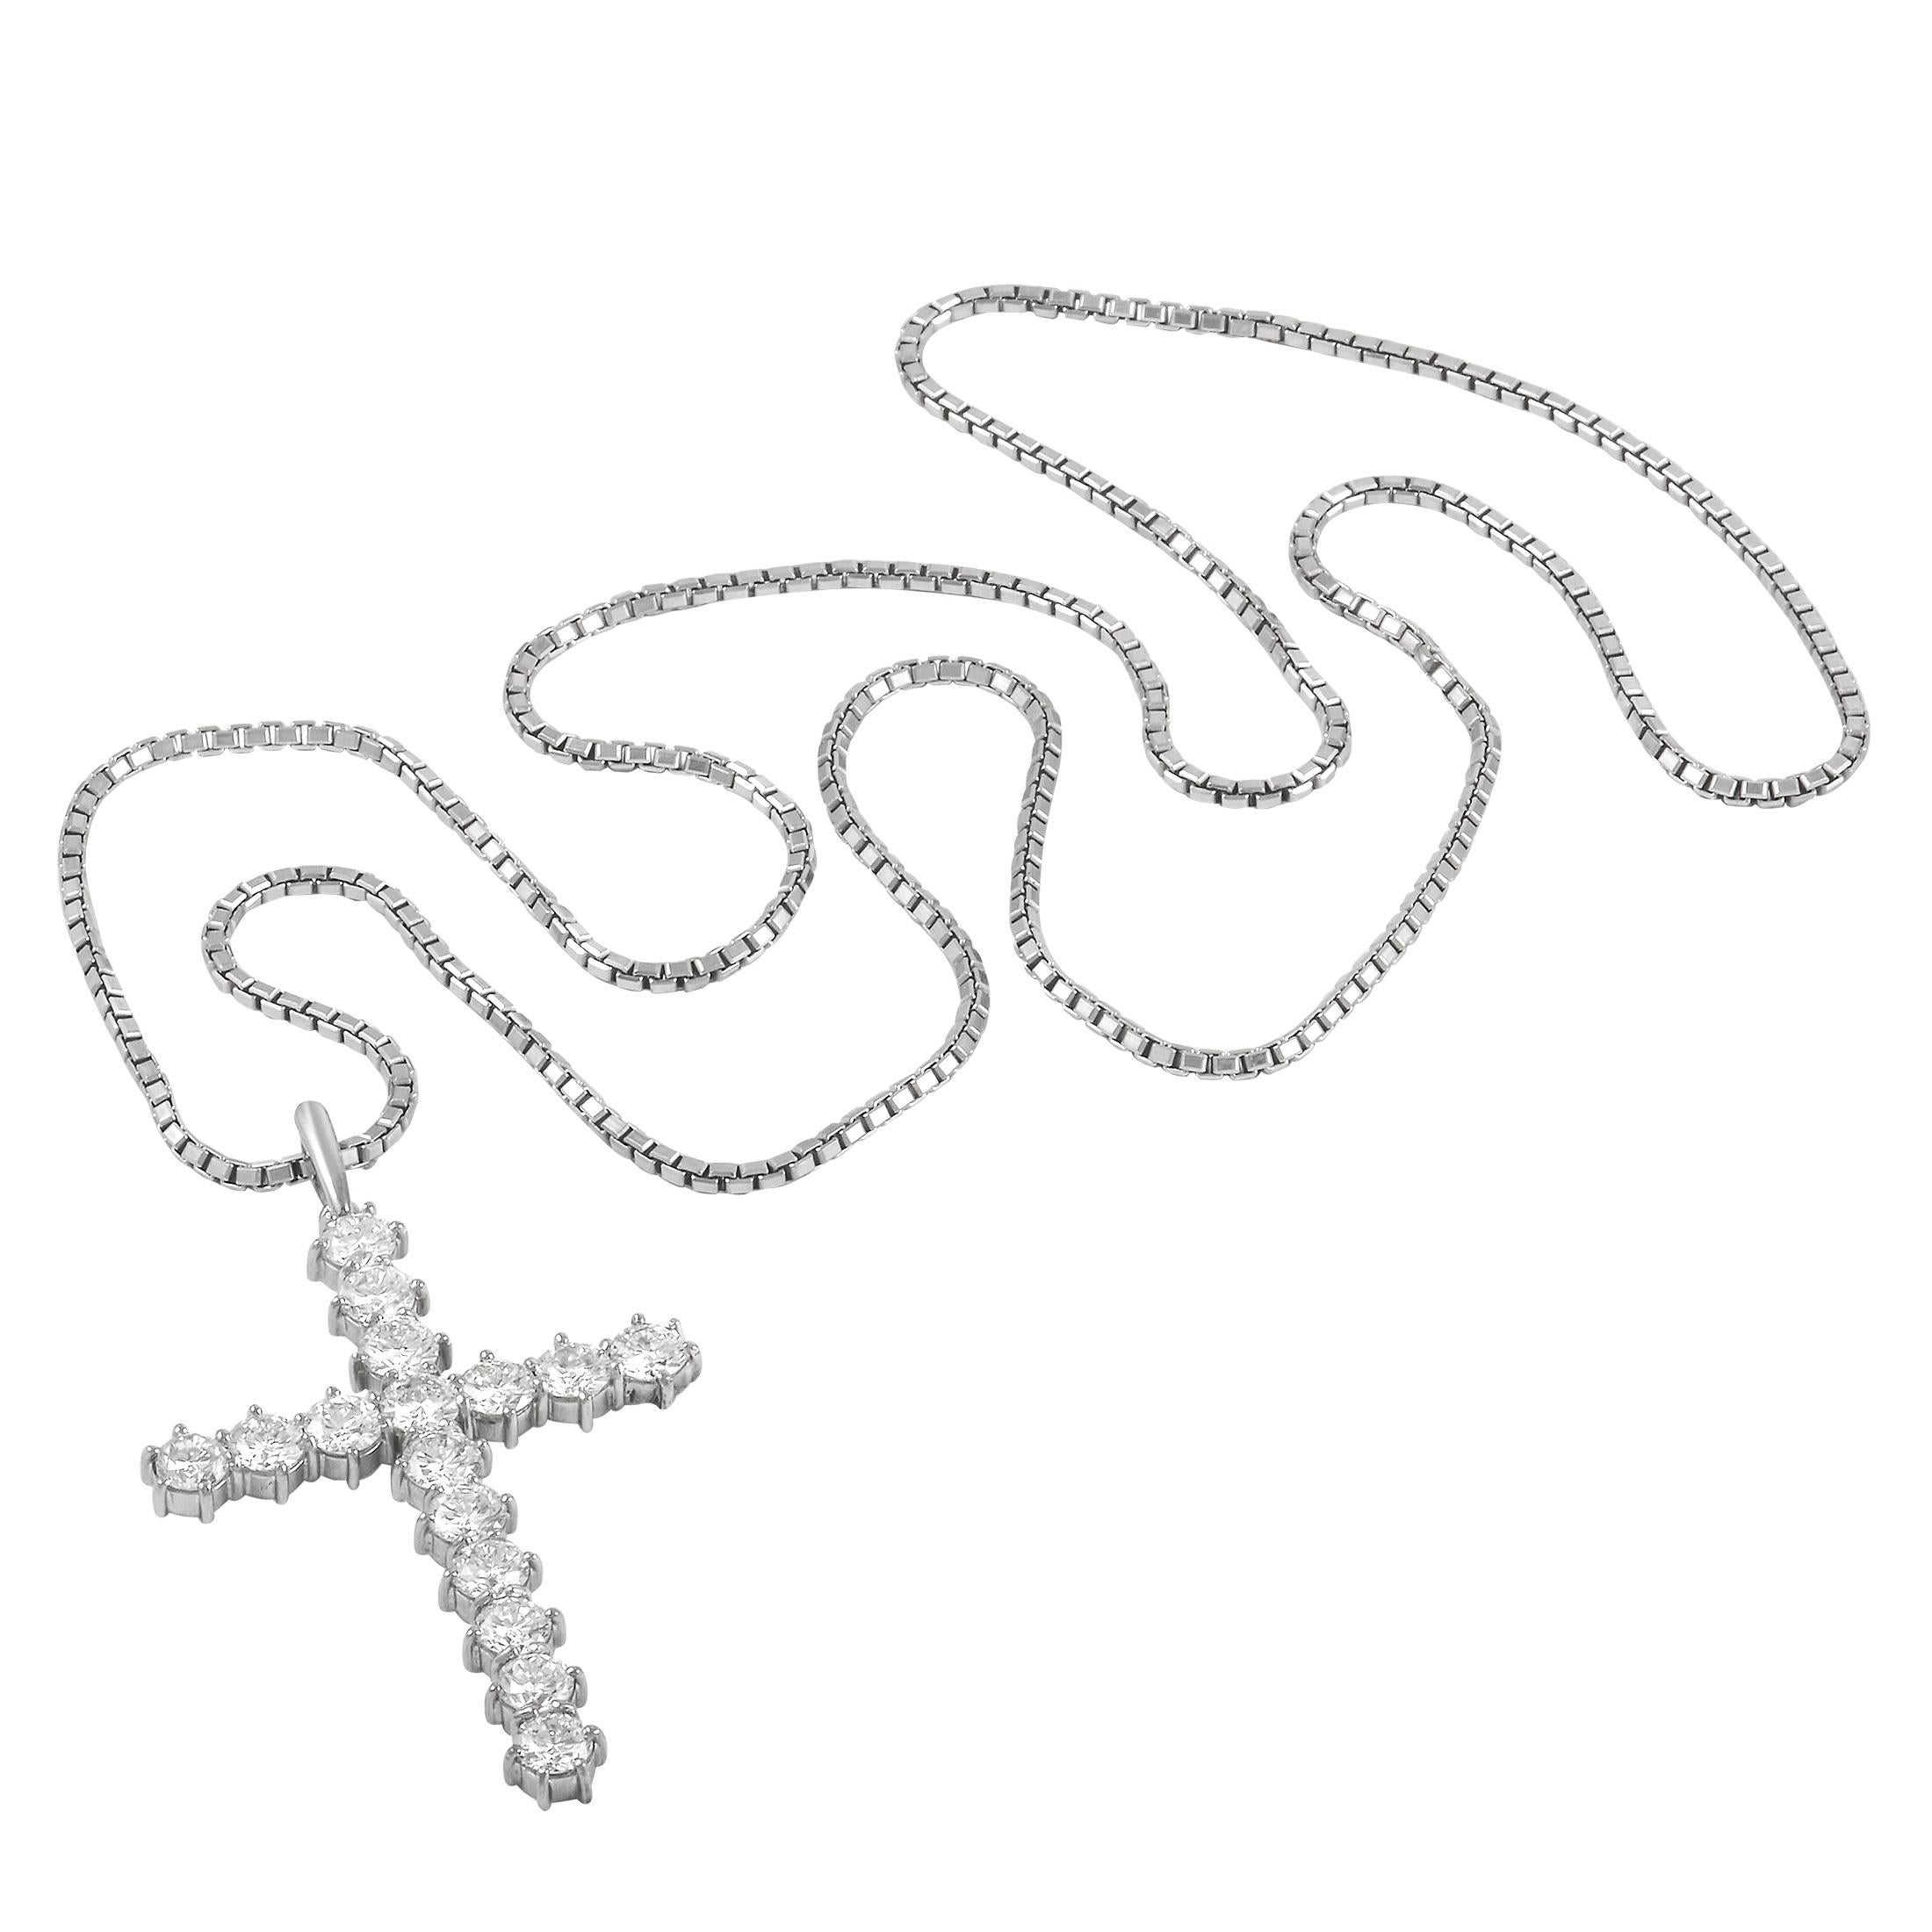 This LB Exclusive cross necklace is a classic piece. The necklace is made with an 18K white gold chain, highlighting the matching 18K white gold cross pendant. The pendant is set with 7.00 carats of round-cut diamonds of H-color and SI-1 clarity